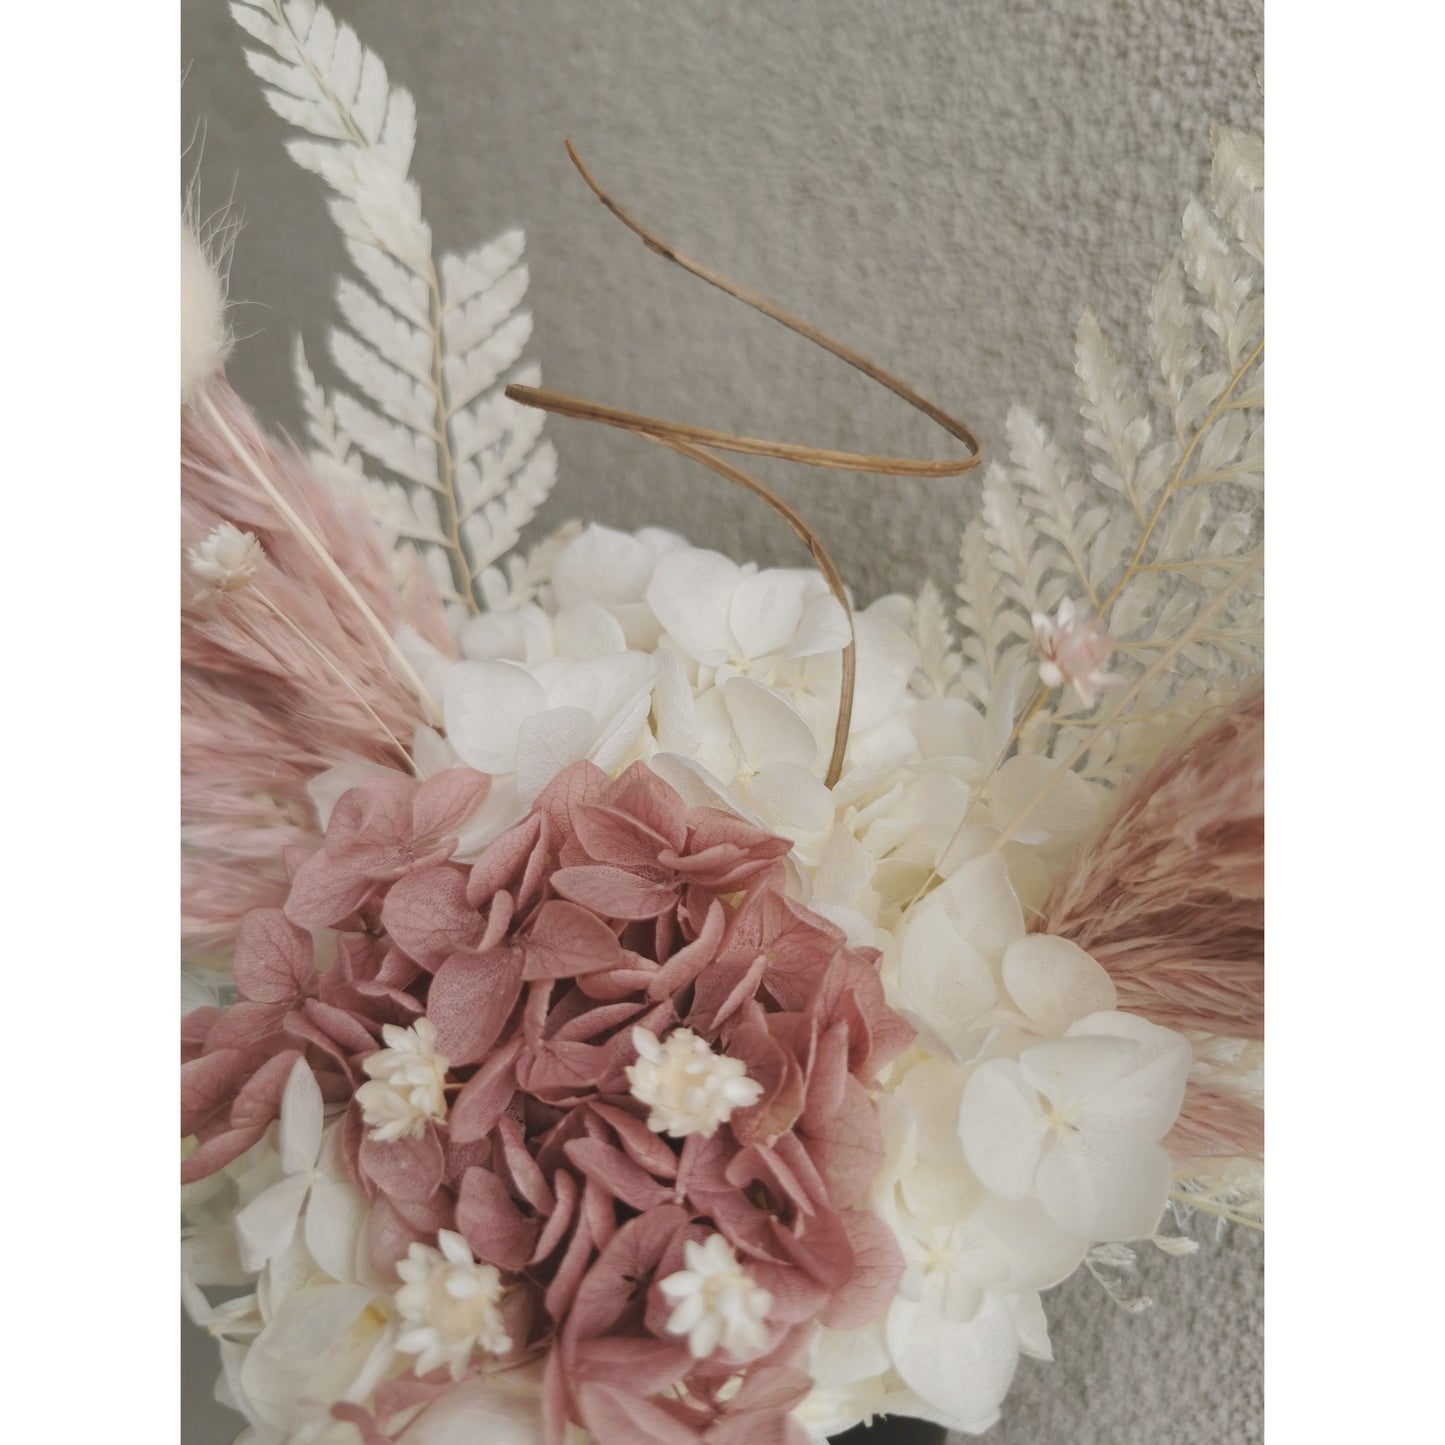 Dried & preserved flowers in dusy pink and white and designed to look like angel wings & halo and set in to a mini black pot. Picture shows flowers held against a blank wall and zoomed in to show a closer look at flowers